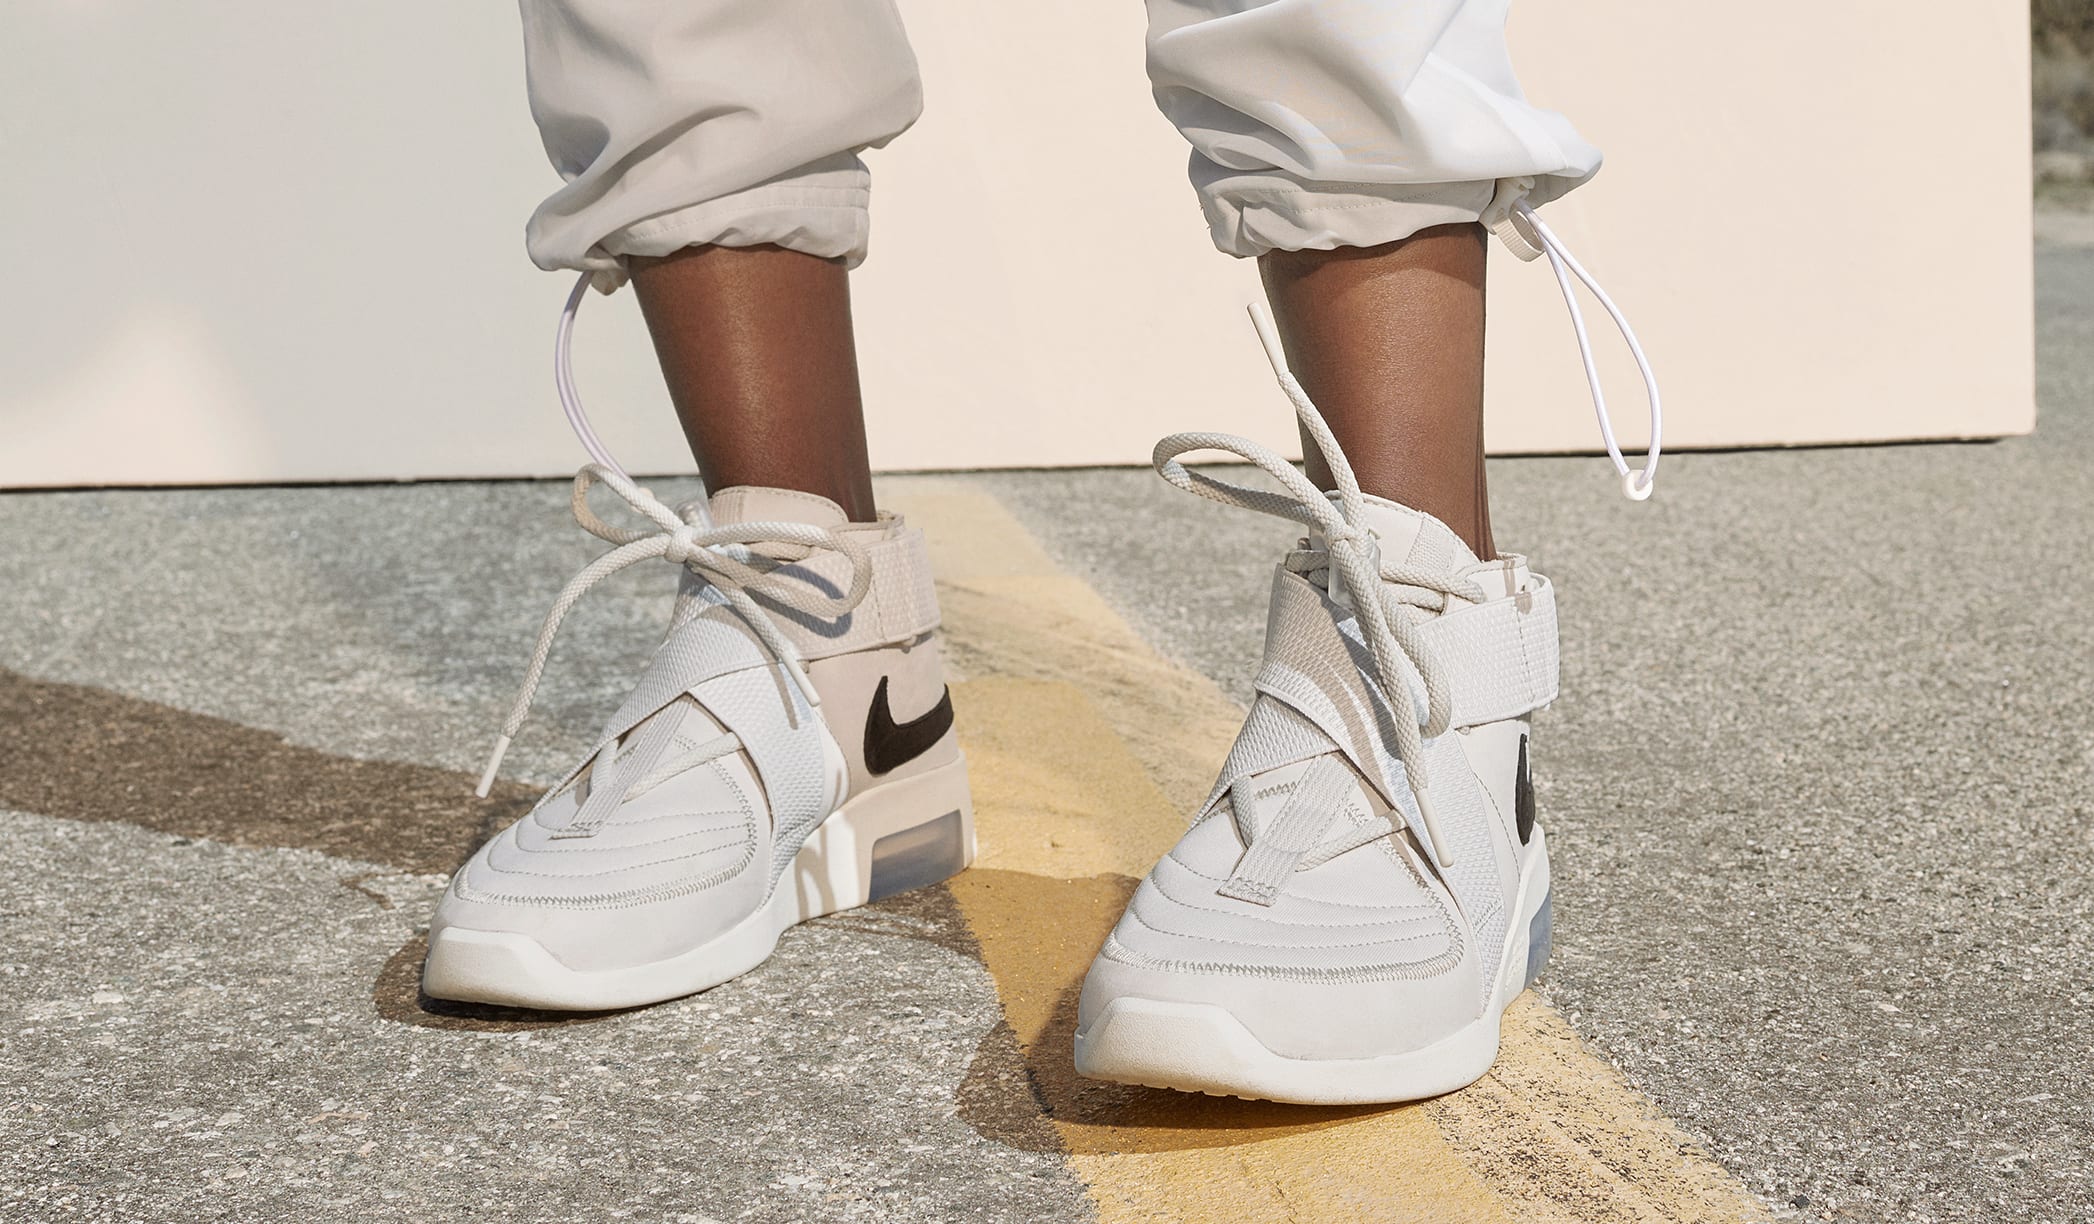 Nike Air Fear of God Spring/Summer 2019 Collection 5